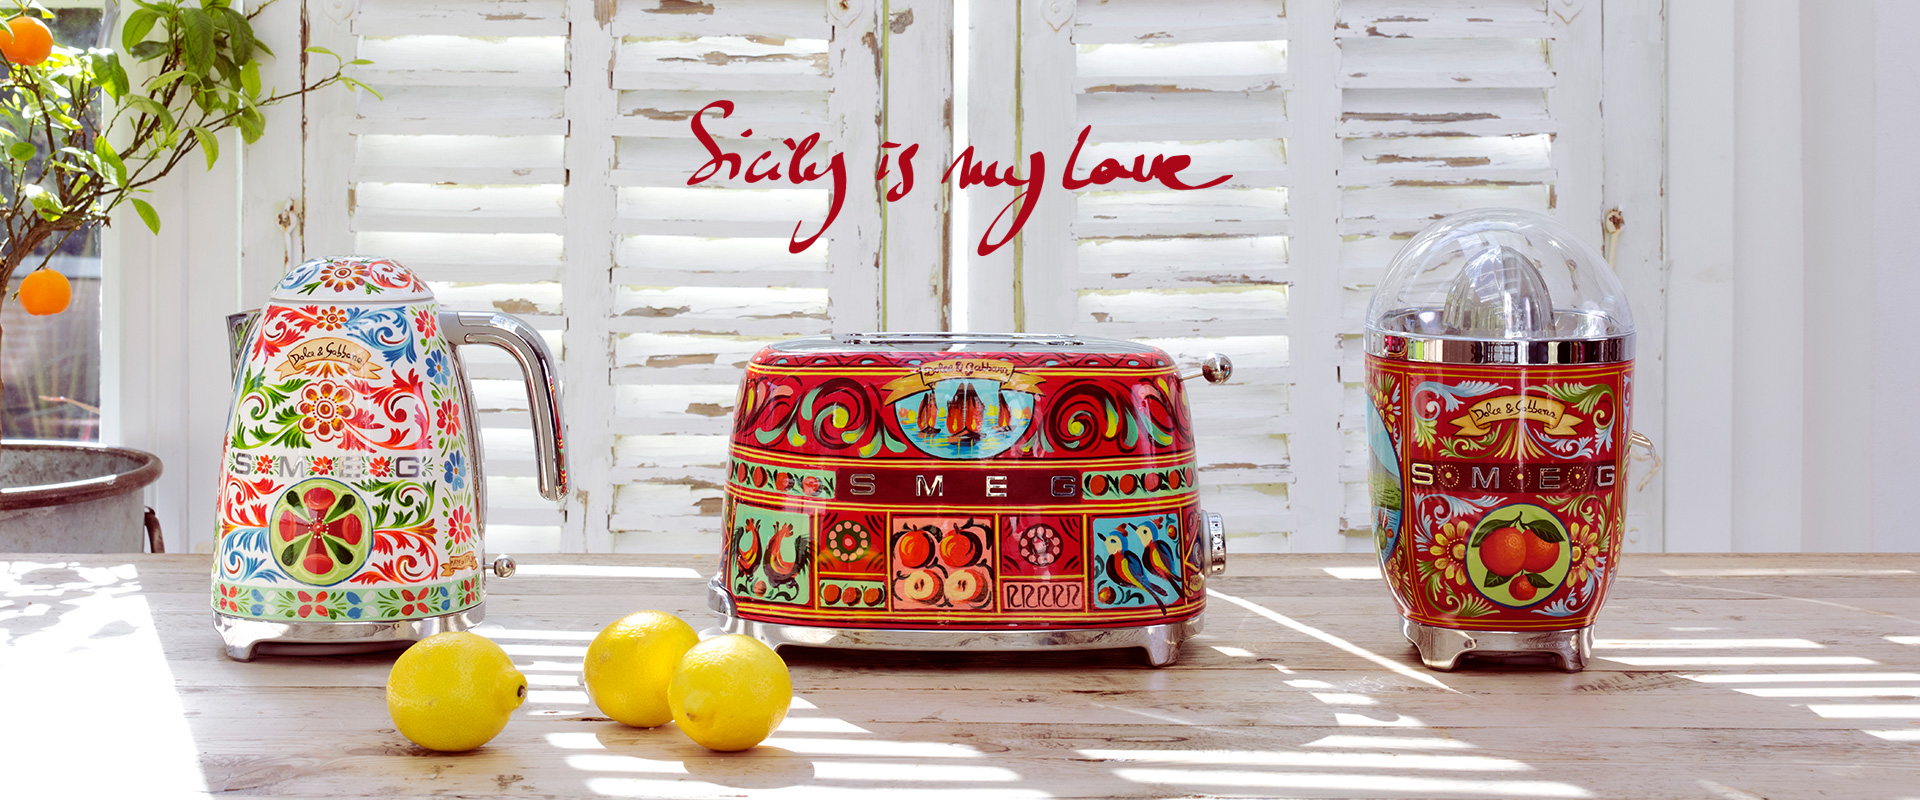 dolce-and-gabbana-smeg-sicily-is-my-love-top-banner